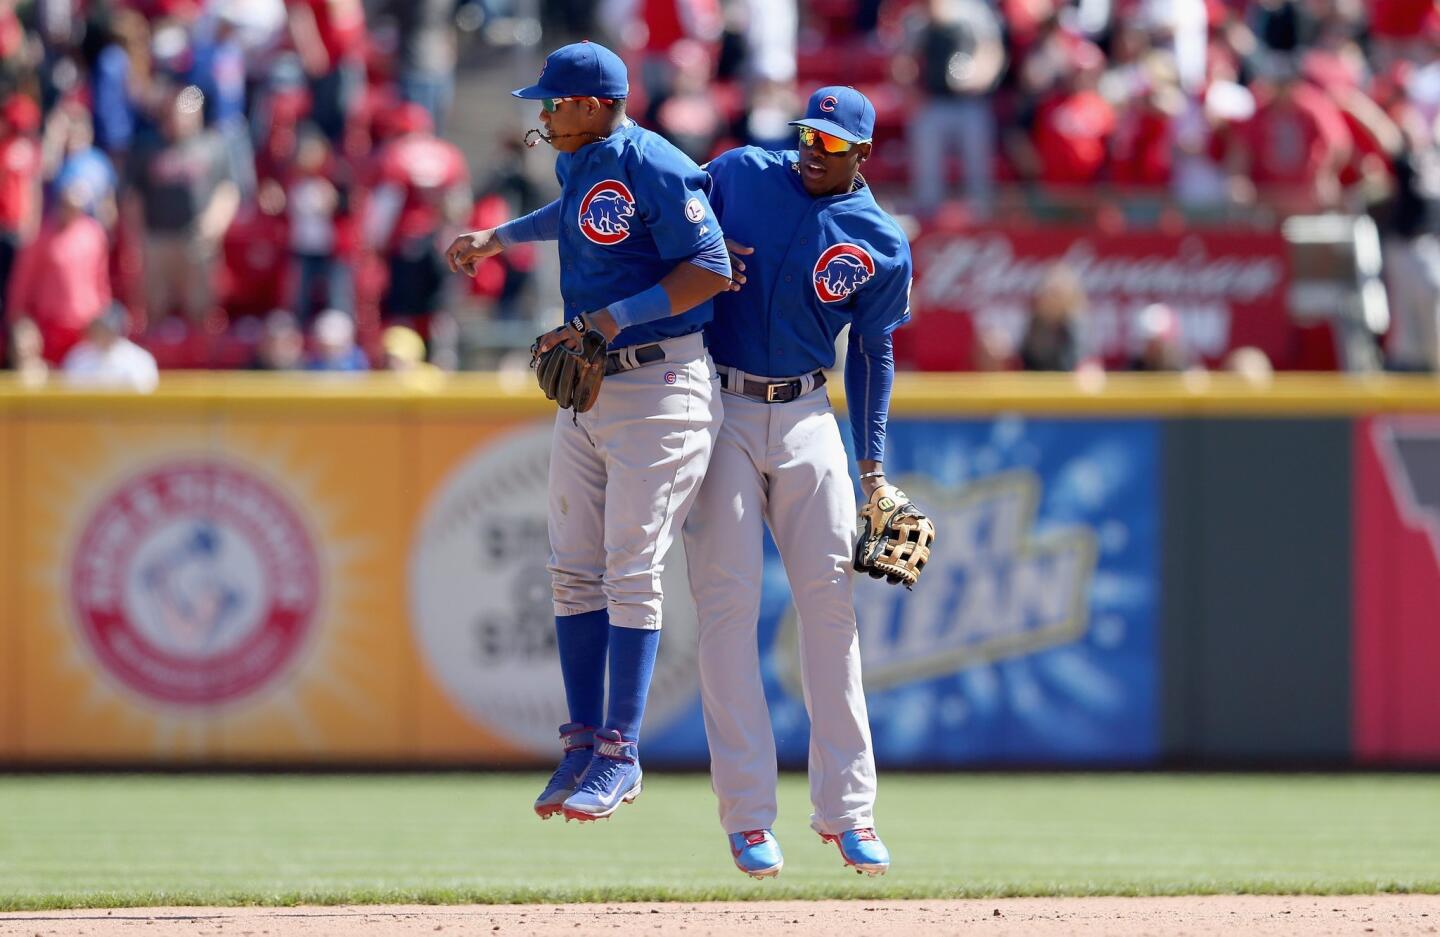 Starlin Castro celebrates with Dexter Fowler after the last out of the 5-2 win over the Reds at Great American Ball Park.